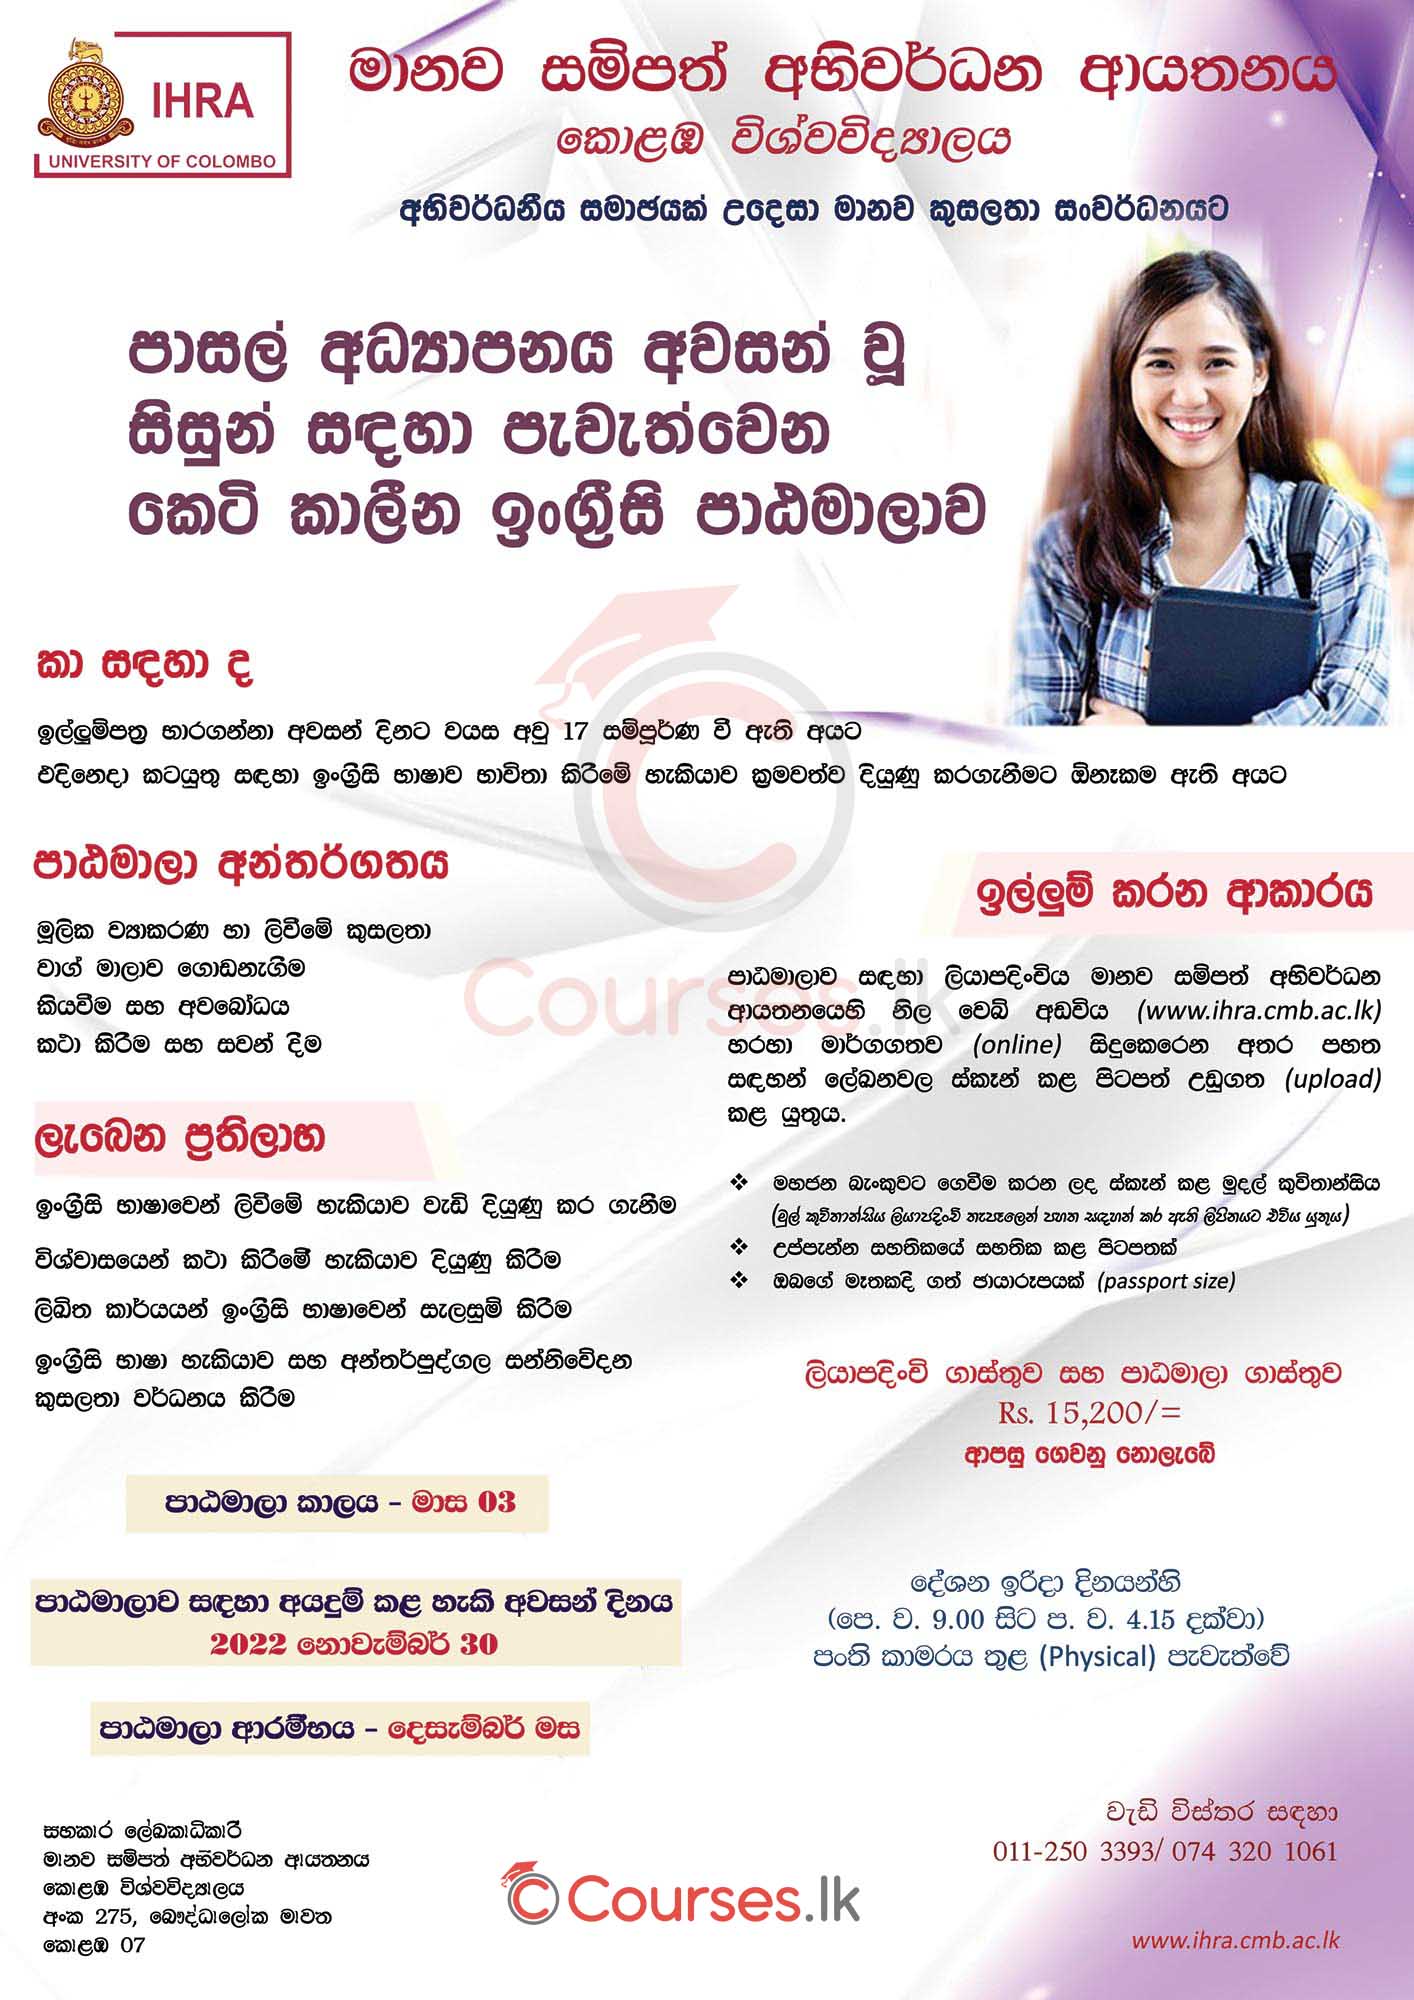 Short Course in English Language for School Leavers 2022 - University of Colombo